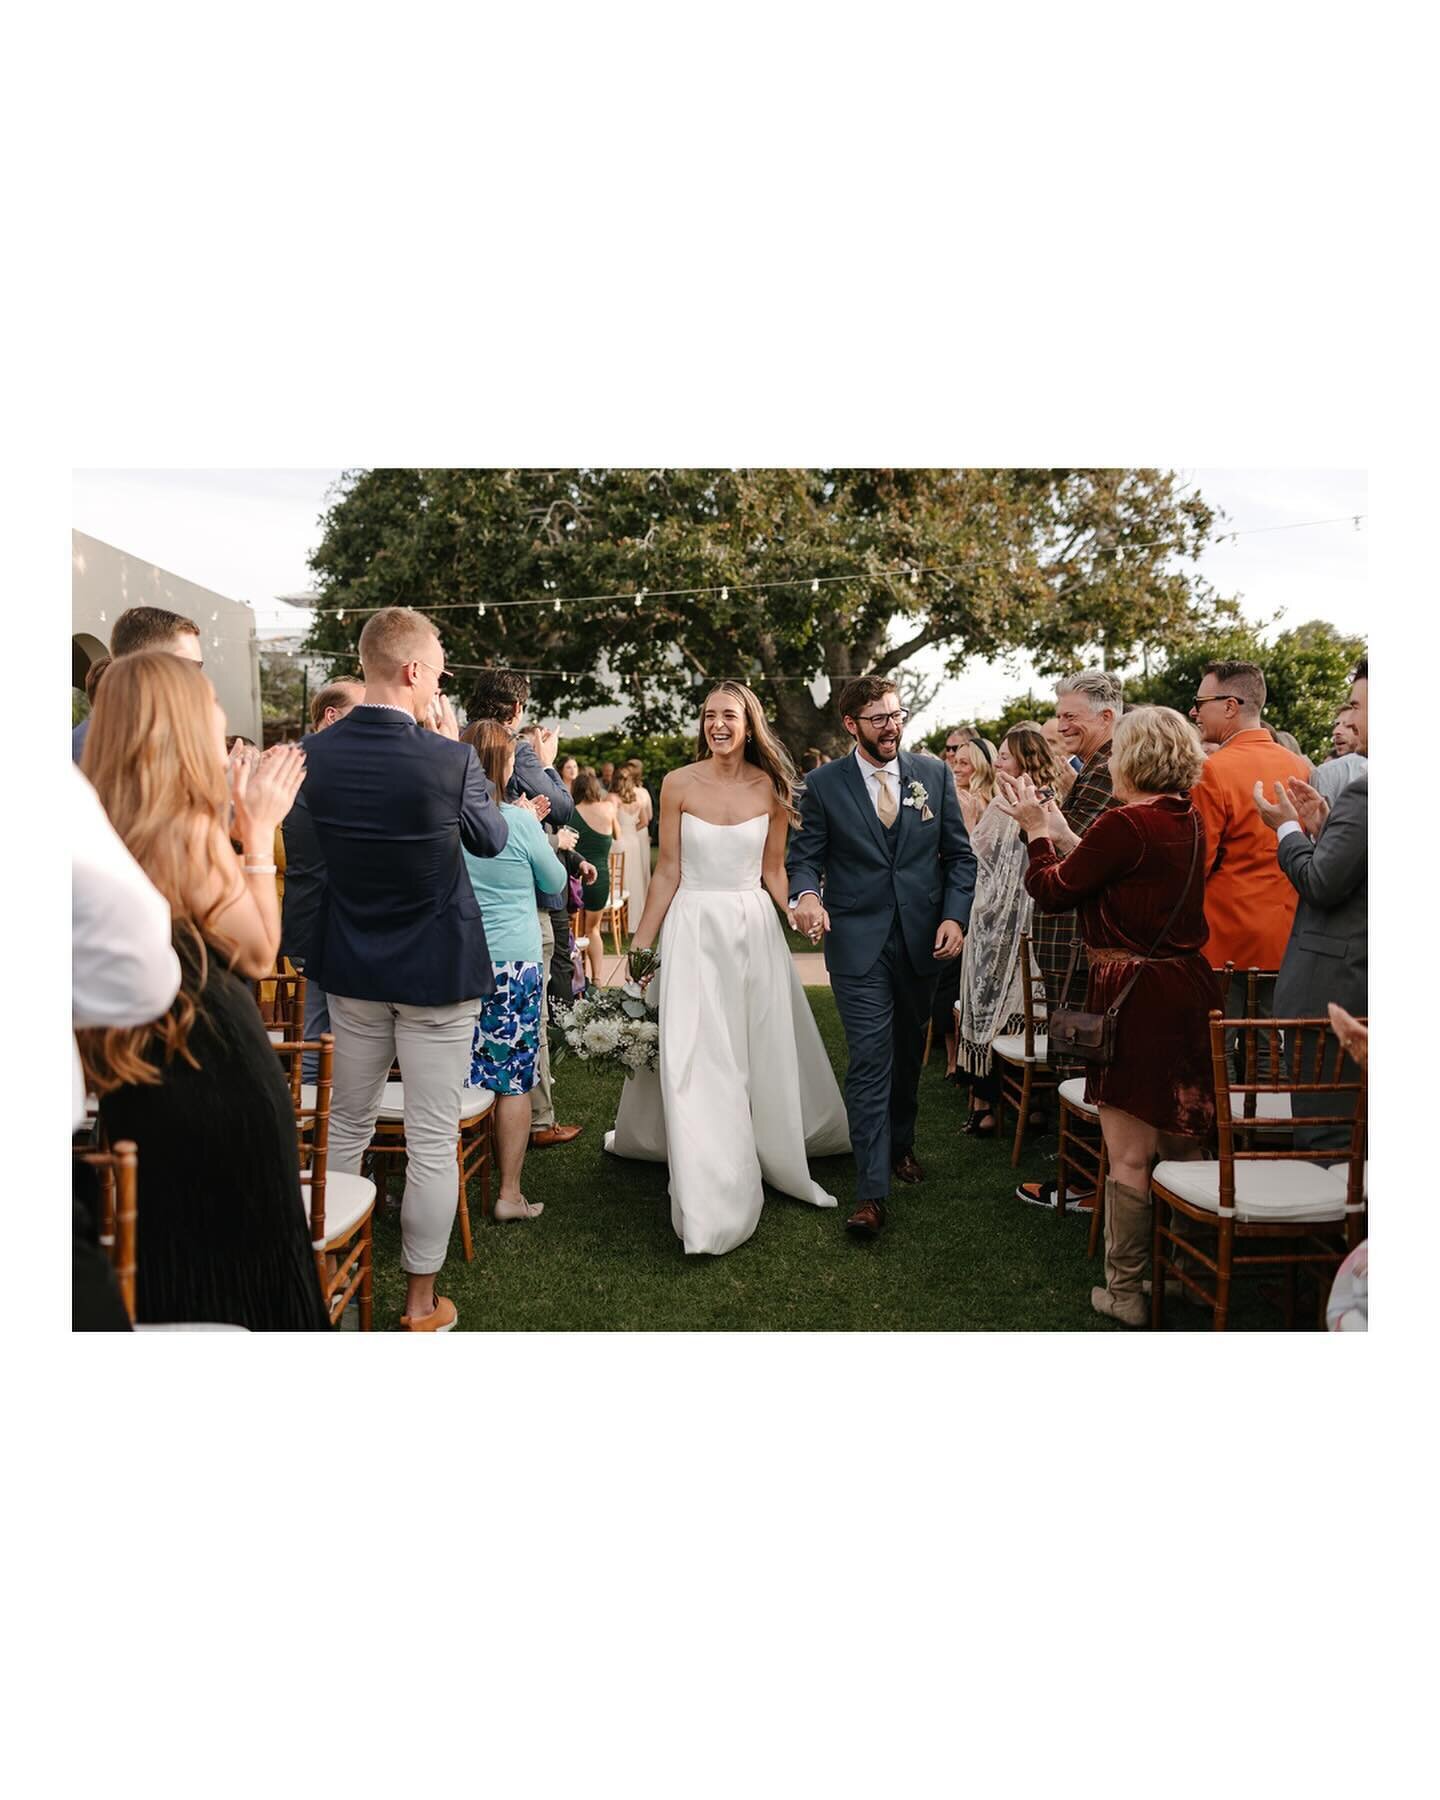 A very very small handful of my favorite images from Coral + Brian&rsquo;s La Jolla wedding. 

10 slides with multiple photographs still isn&rsquo;t enough to share all the beauty, emotion, and joy of this day!!

@revealhairandmakeup
@continentalcate